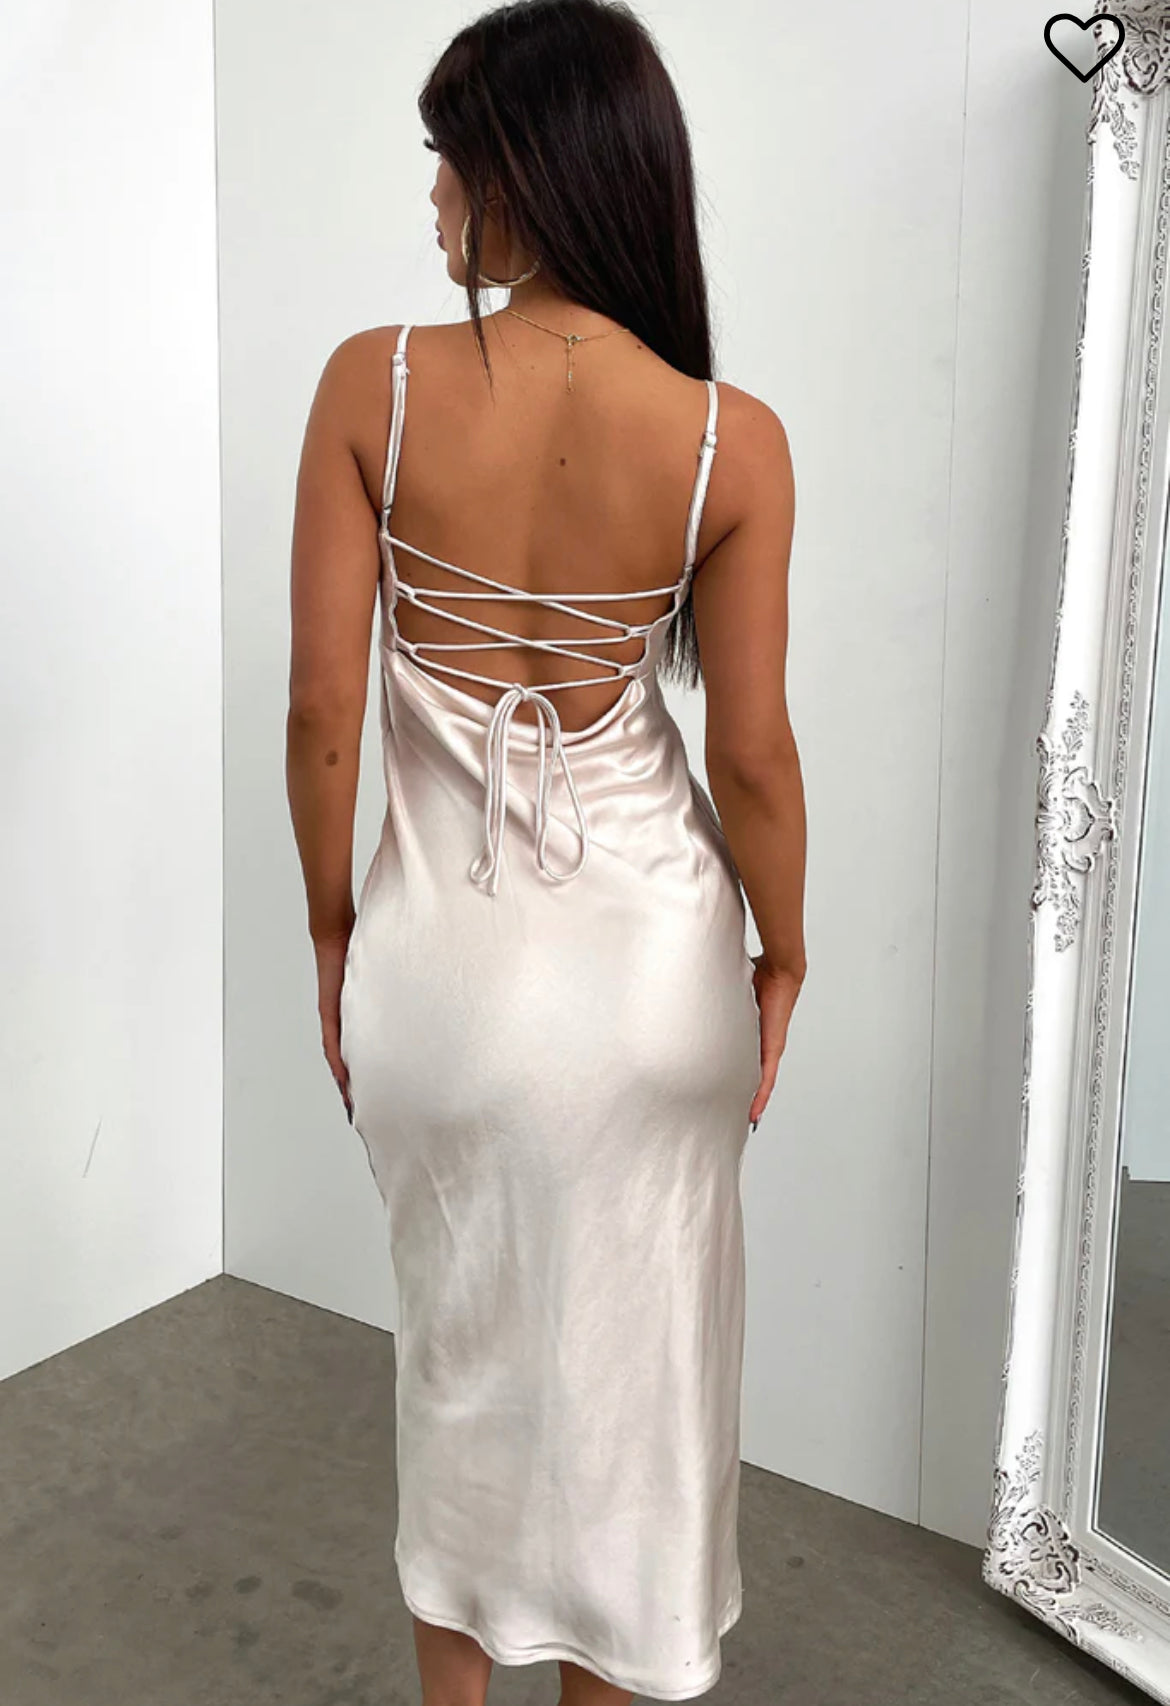 The amaryllis Midi Dress in Ivory beginning boutique, wedding, cocktail or birthday dress. satin. tie up back